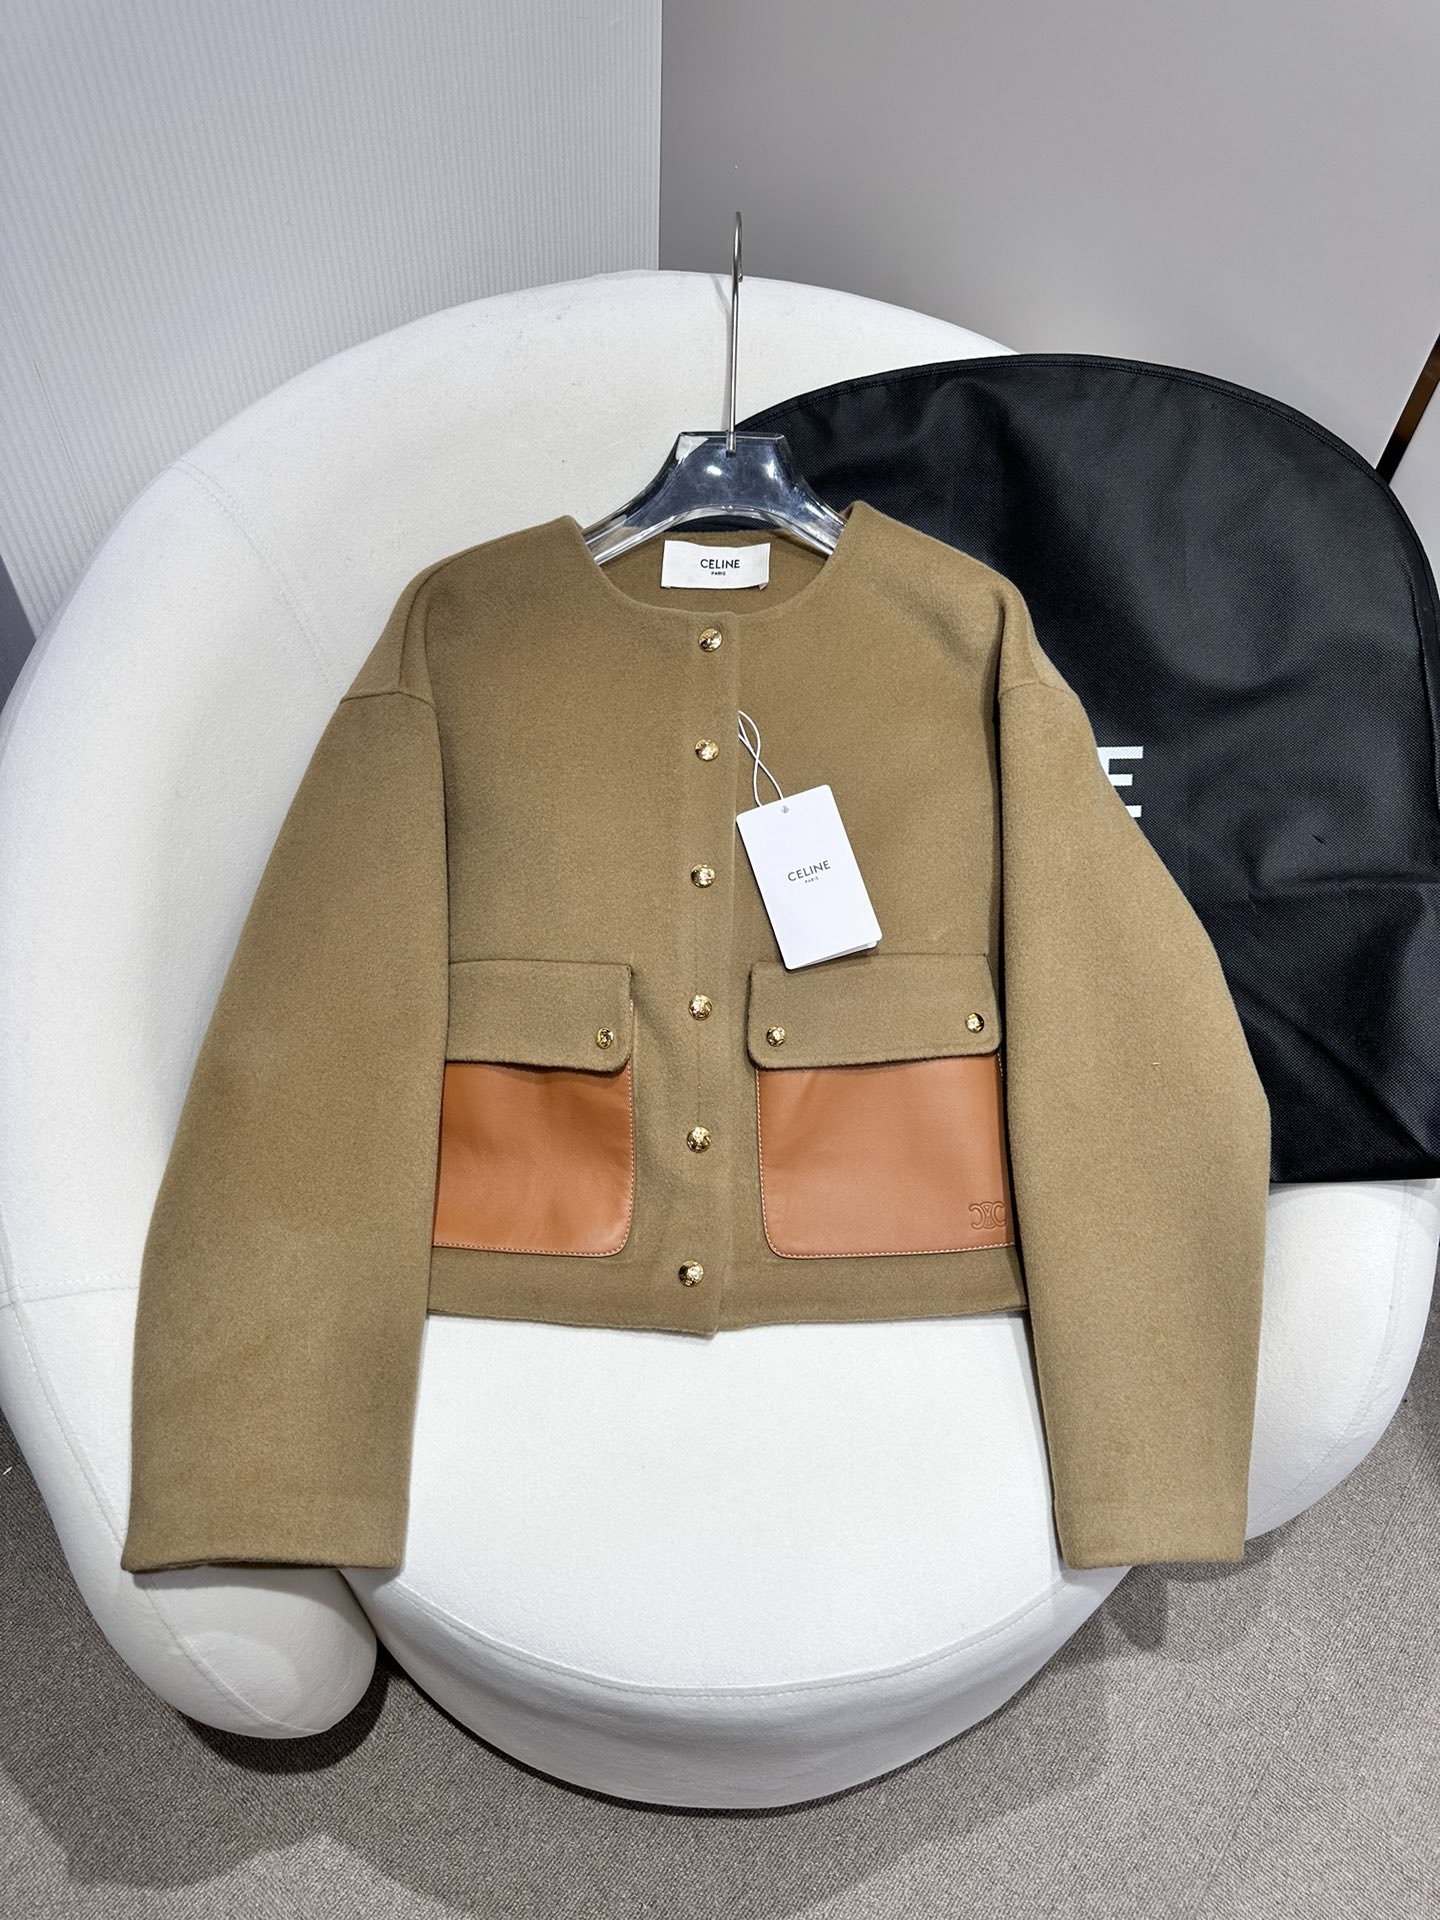 Celine Clothing Coats & Jackets Only sell high-quality
 Caramel White Gold Hardware Cashmere Genuine Leather Fall/Winter Collection Vintage